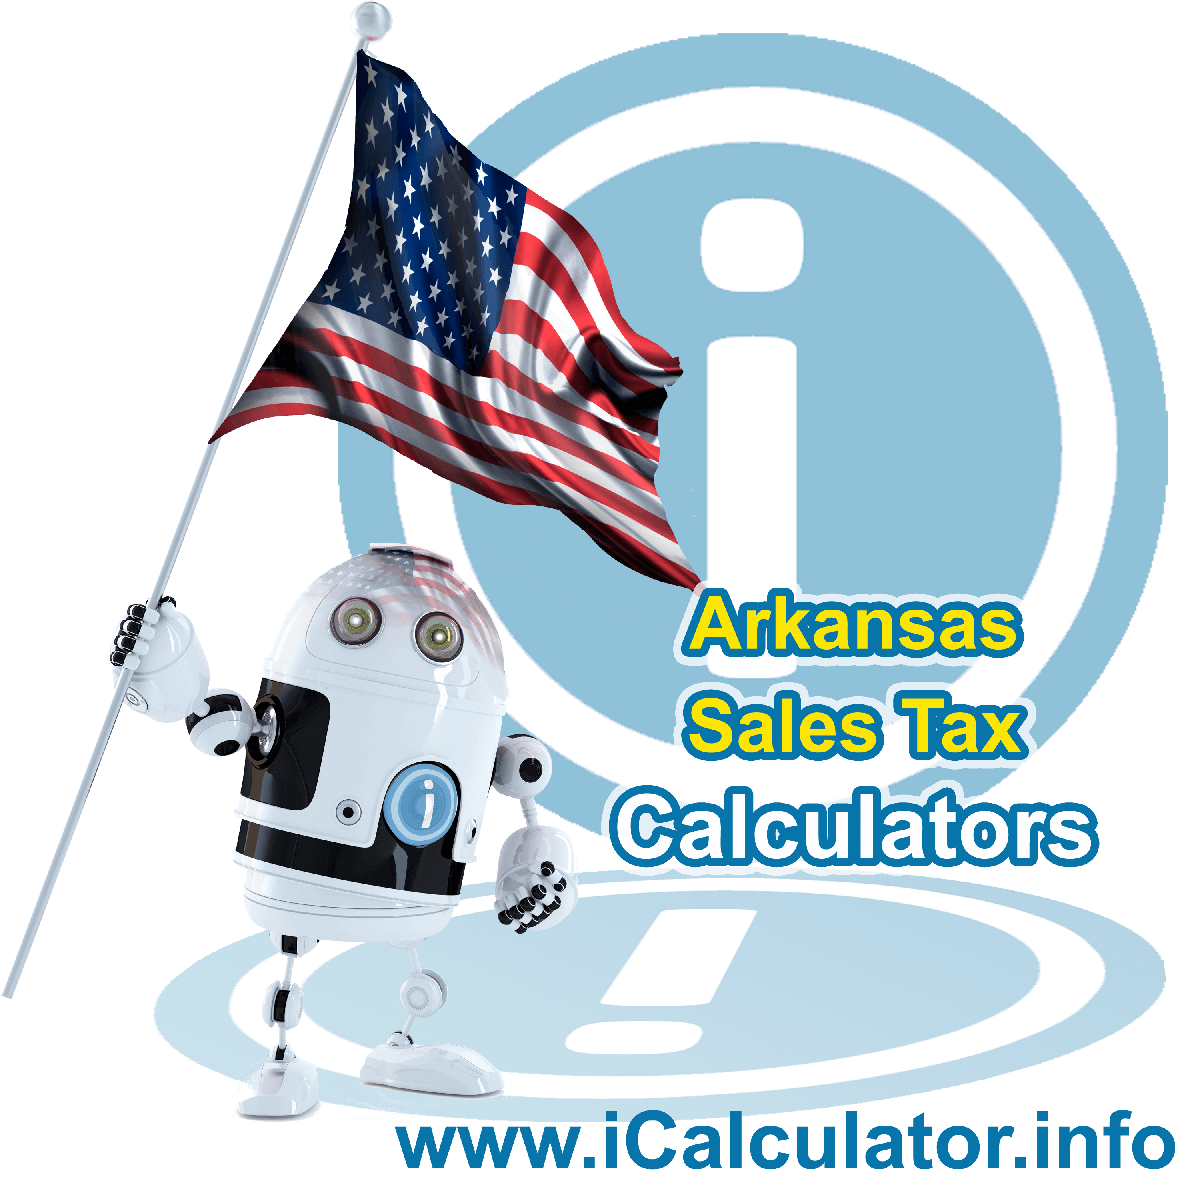 Lafayette County Sales Rates: This image illustrates a calculator robot calculating Lafayette County sales tax manually using the Lafayette County Sales Tax Formula. You can use this information to calculate Lafayette County Sales Tax manually or use the Lafayette County Sales Tax Calculator to calculate sales tax online.